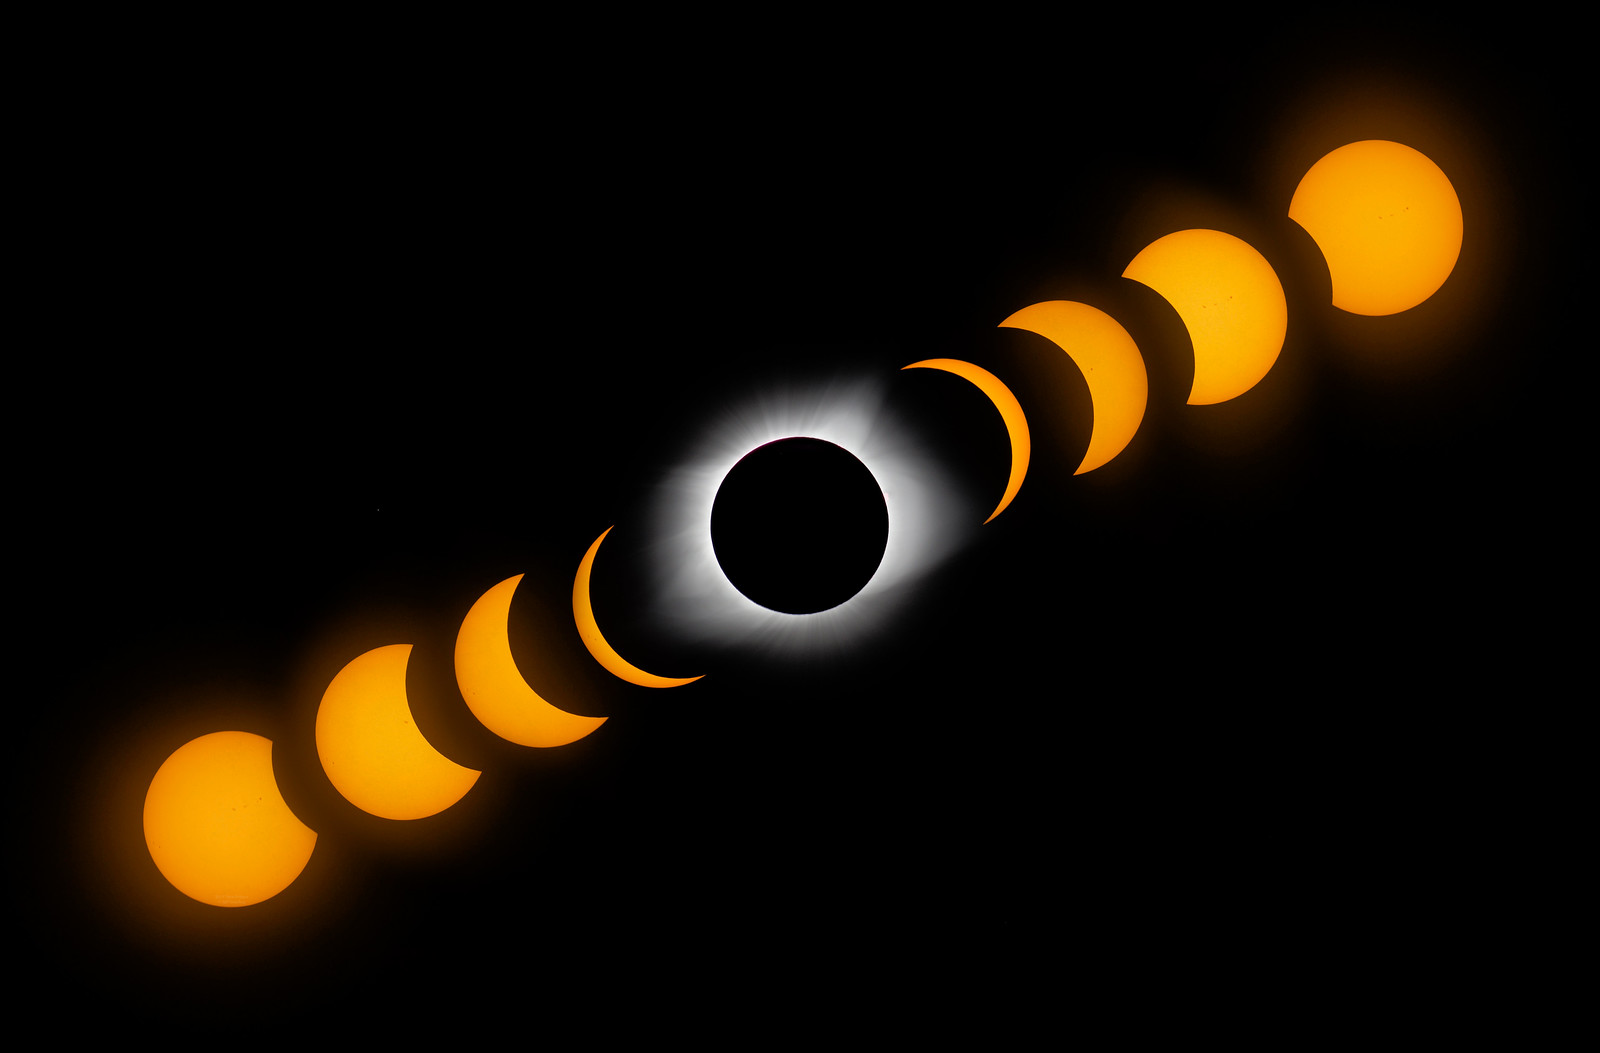 2017 Solar Eclipse with Totality - Composite